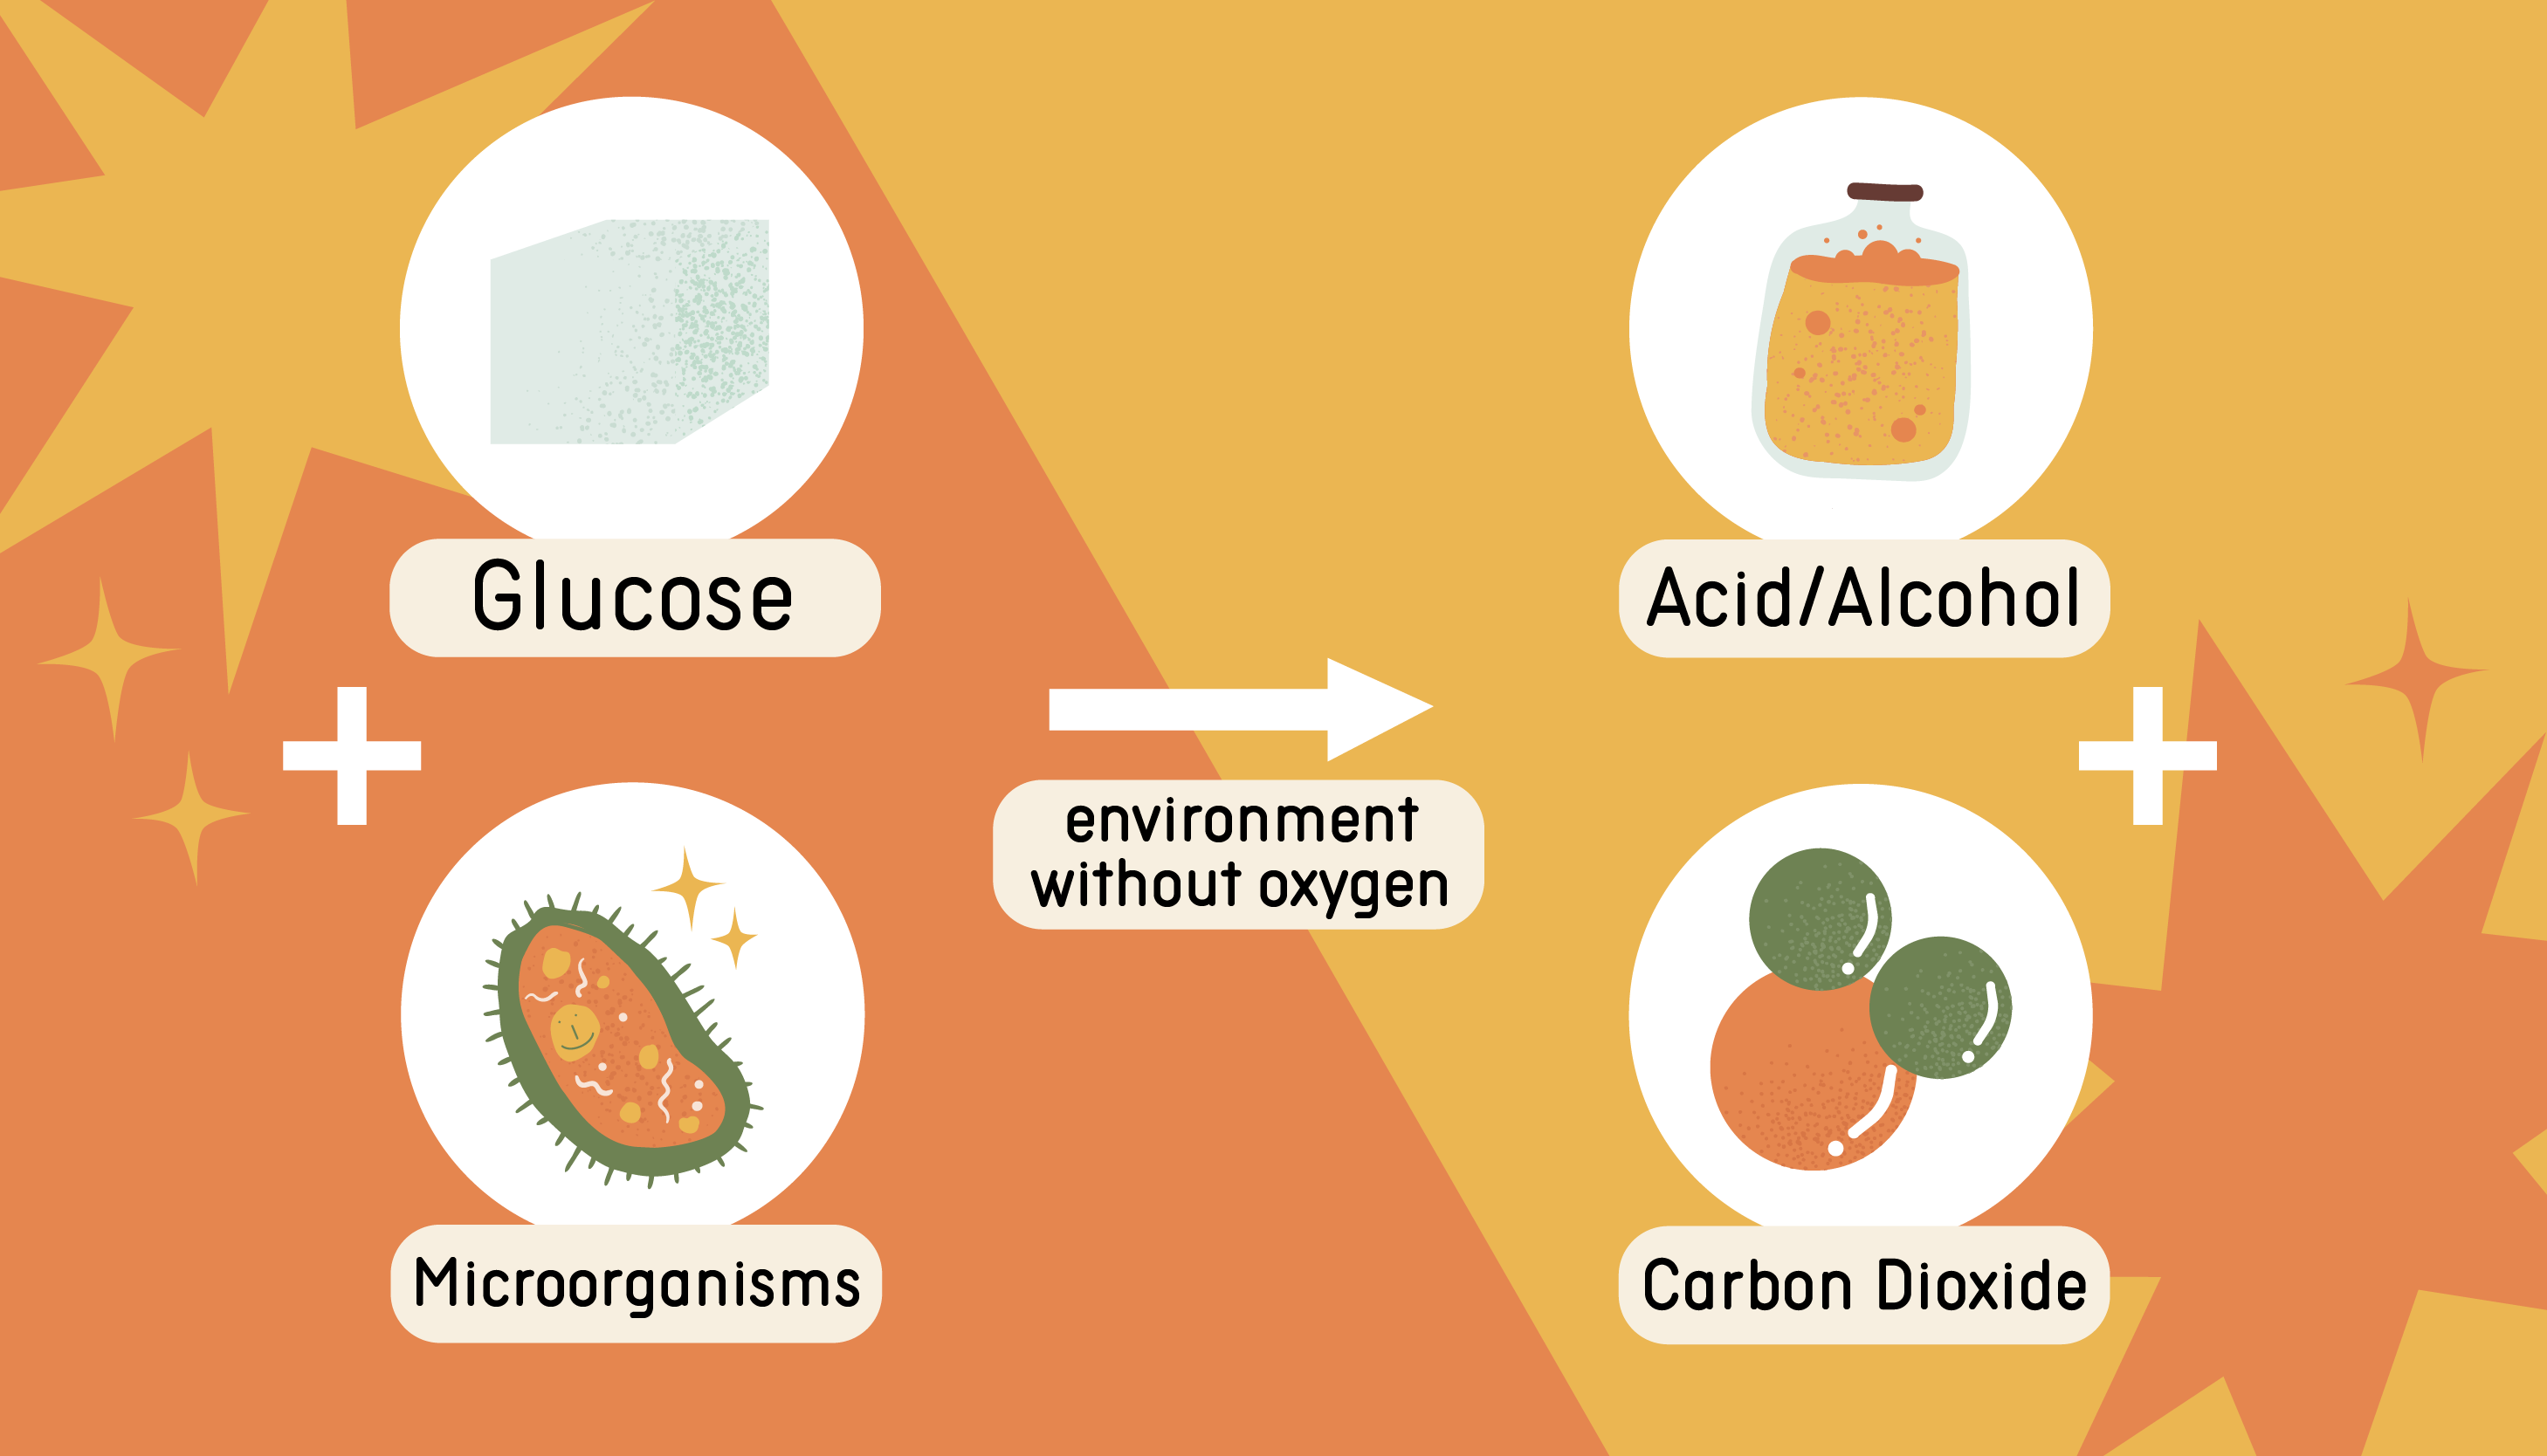 Glucose + Microorganisms in an environment without oxygen and acid/alcohol + carbon dioxide